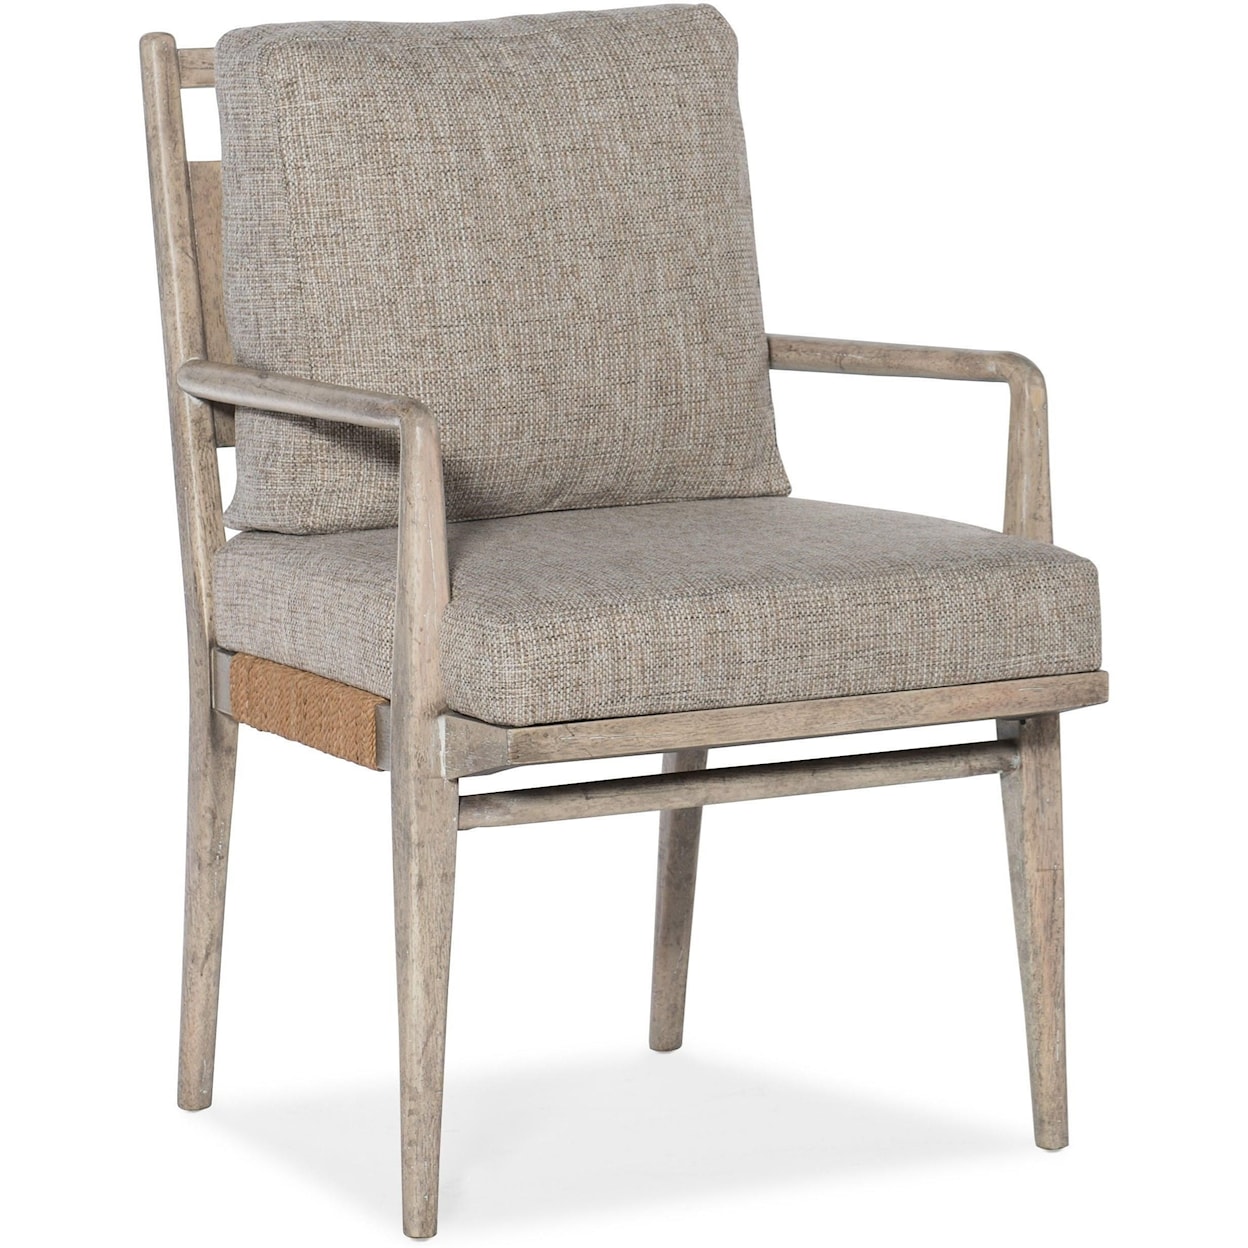 Hooker Furniture American Life Amani Upholstered Arm Chair